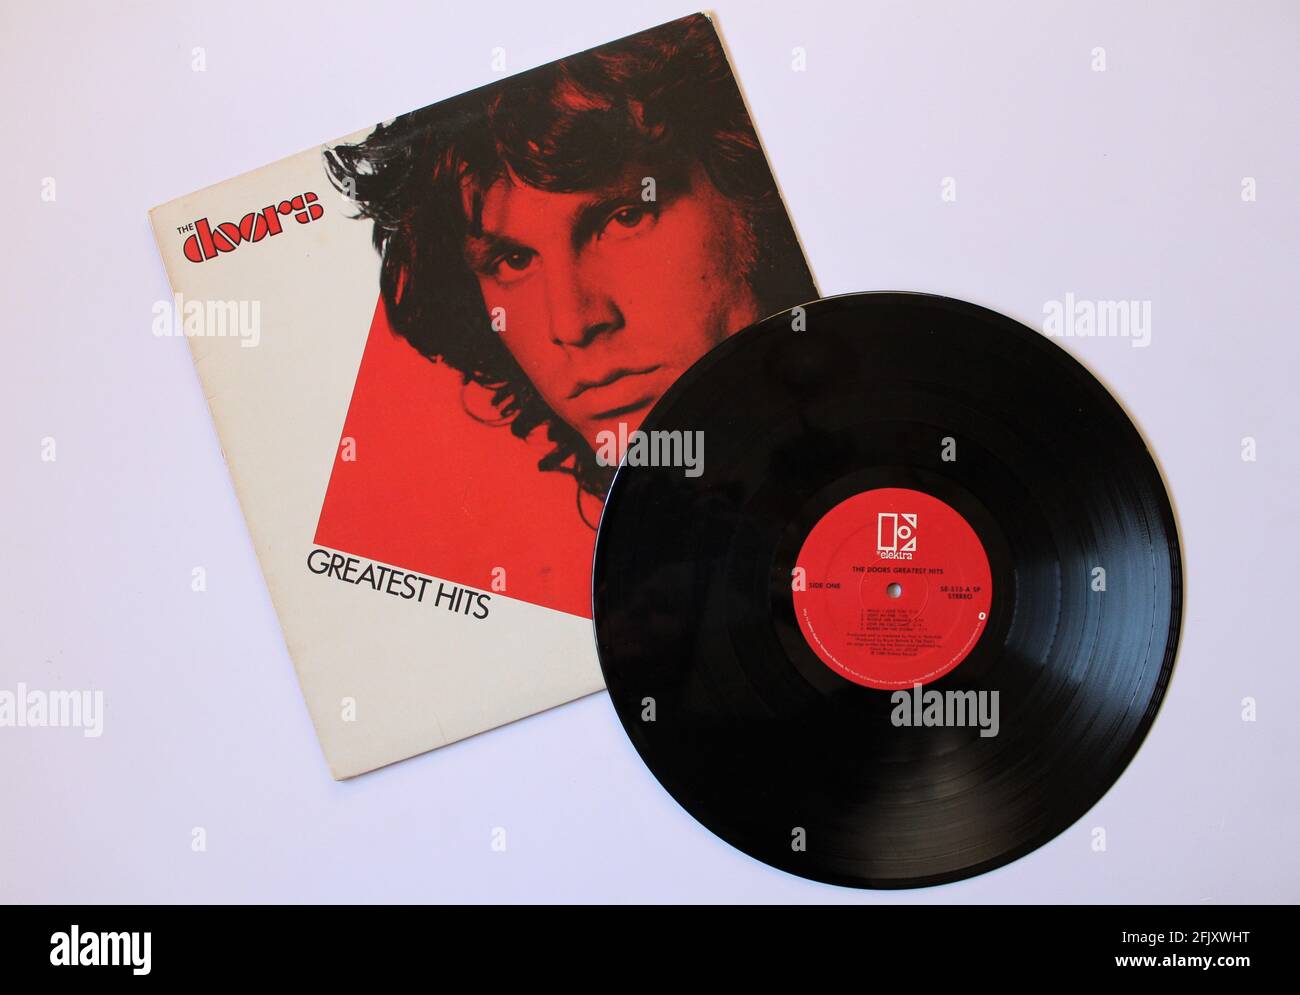 Rock band, The Doors music album on vinyl record LP disc. Self Titled: The Doors Greatest Hits Stock Photo